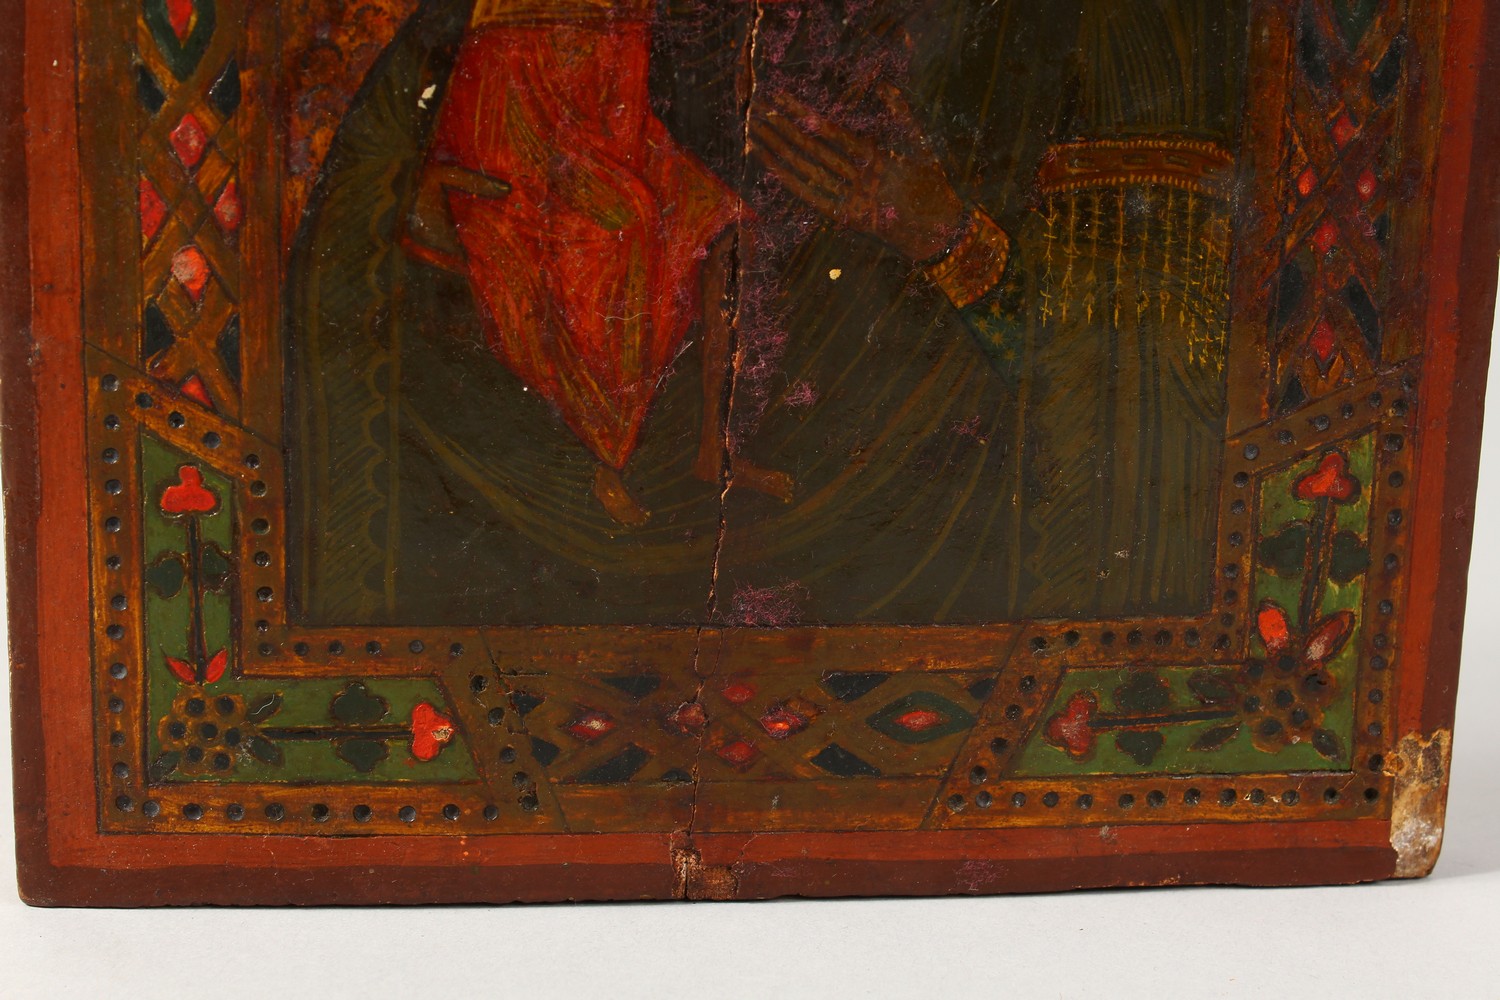 A 17TH CENTURY ICON, Madonna and Child, on panel. 9ins x 7ins. - Image 5 of 10